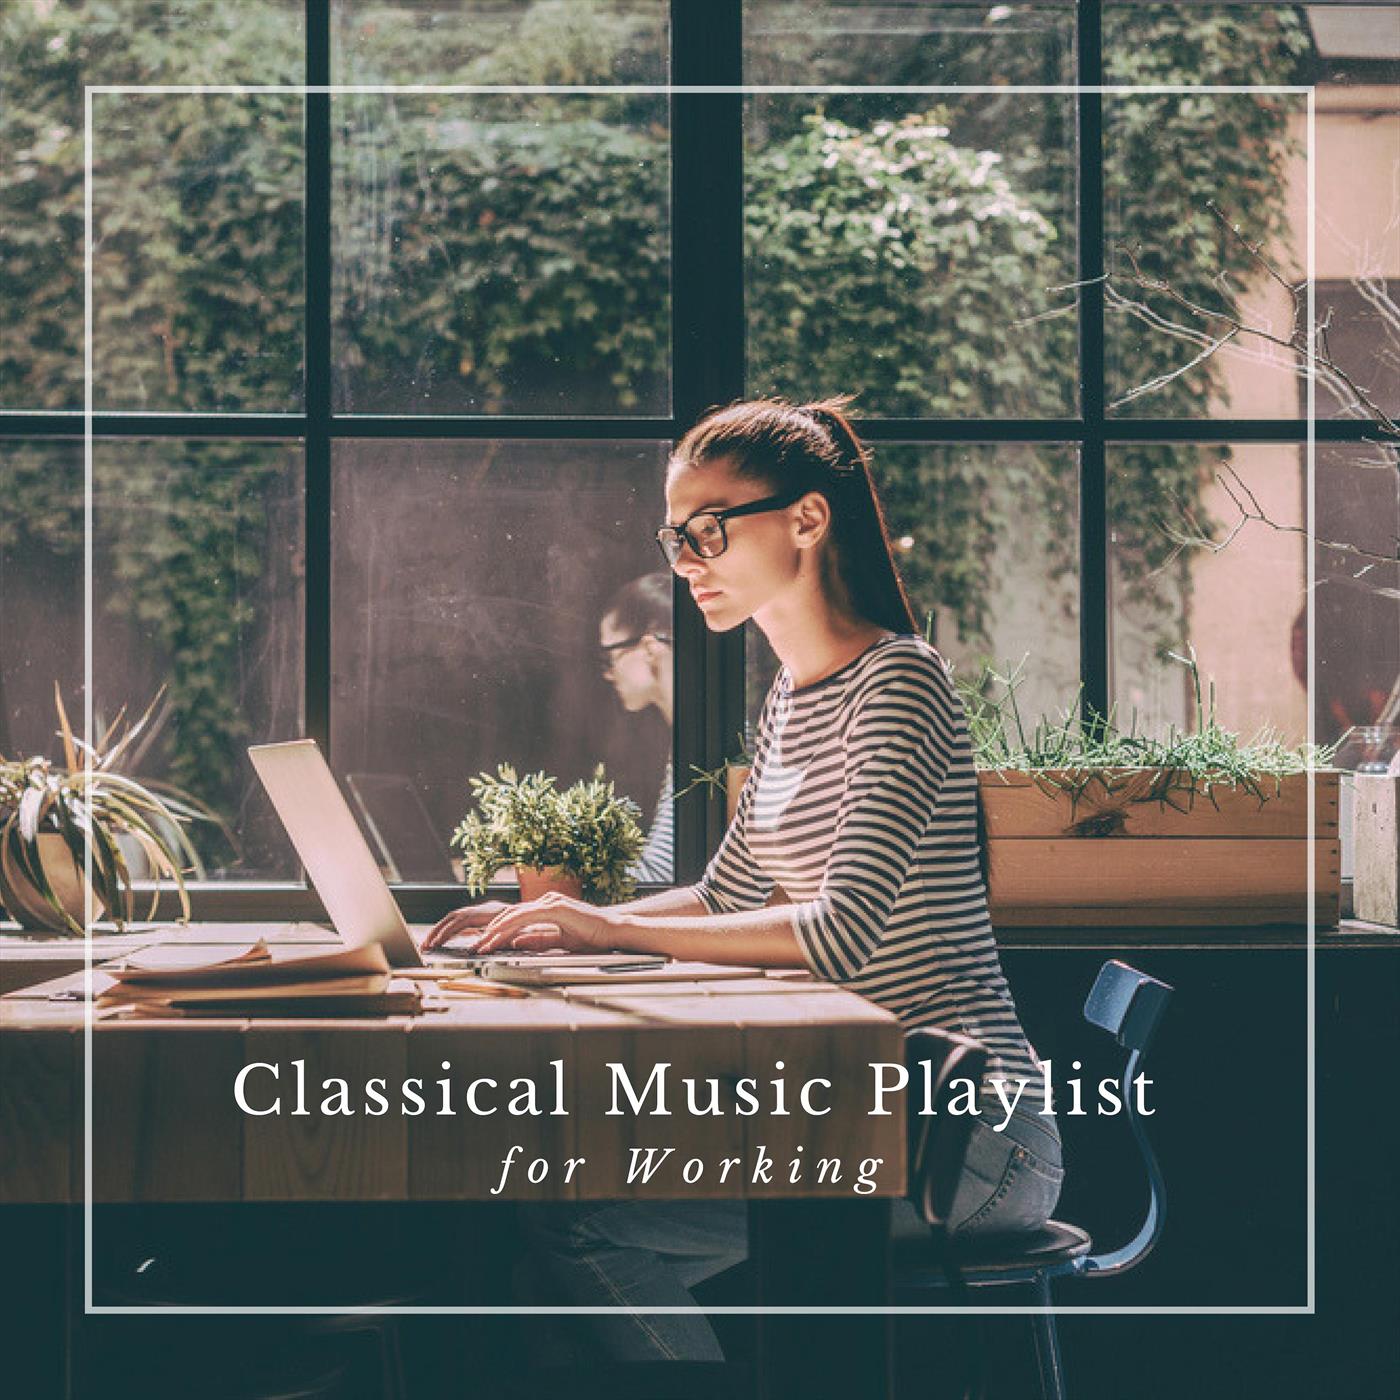 Classical Music Playlist for Working